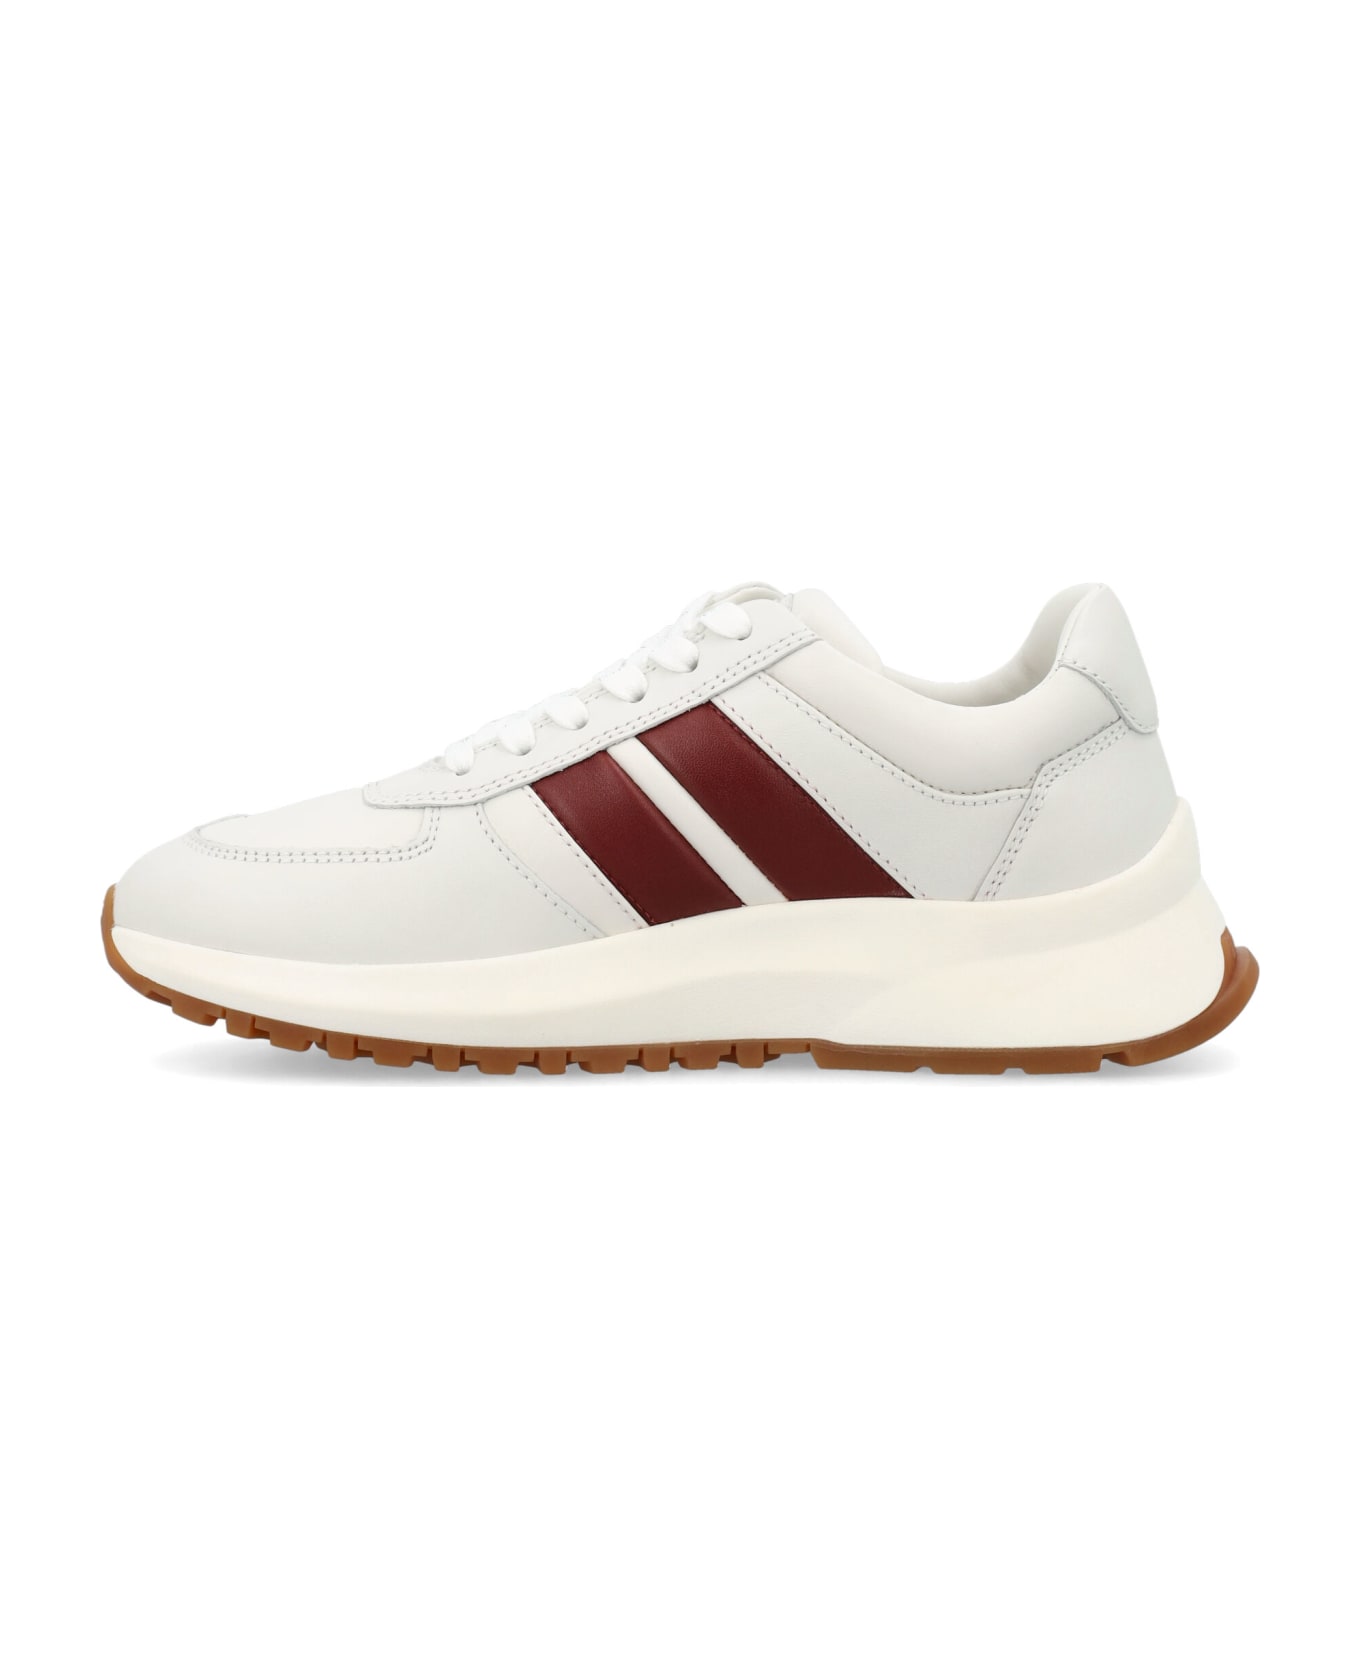 Bally Darsyl-w Leather Woman Sneakers - WHITE/B.RED/WHITE スニーカー